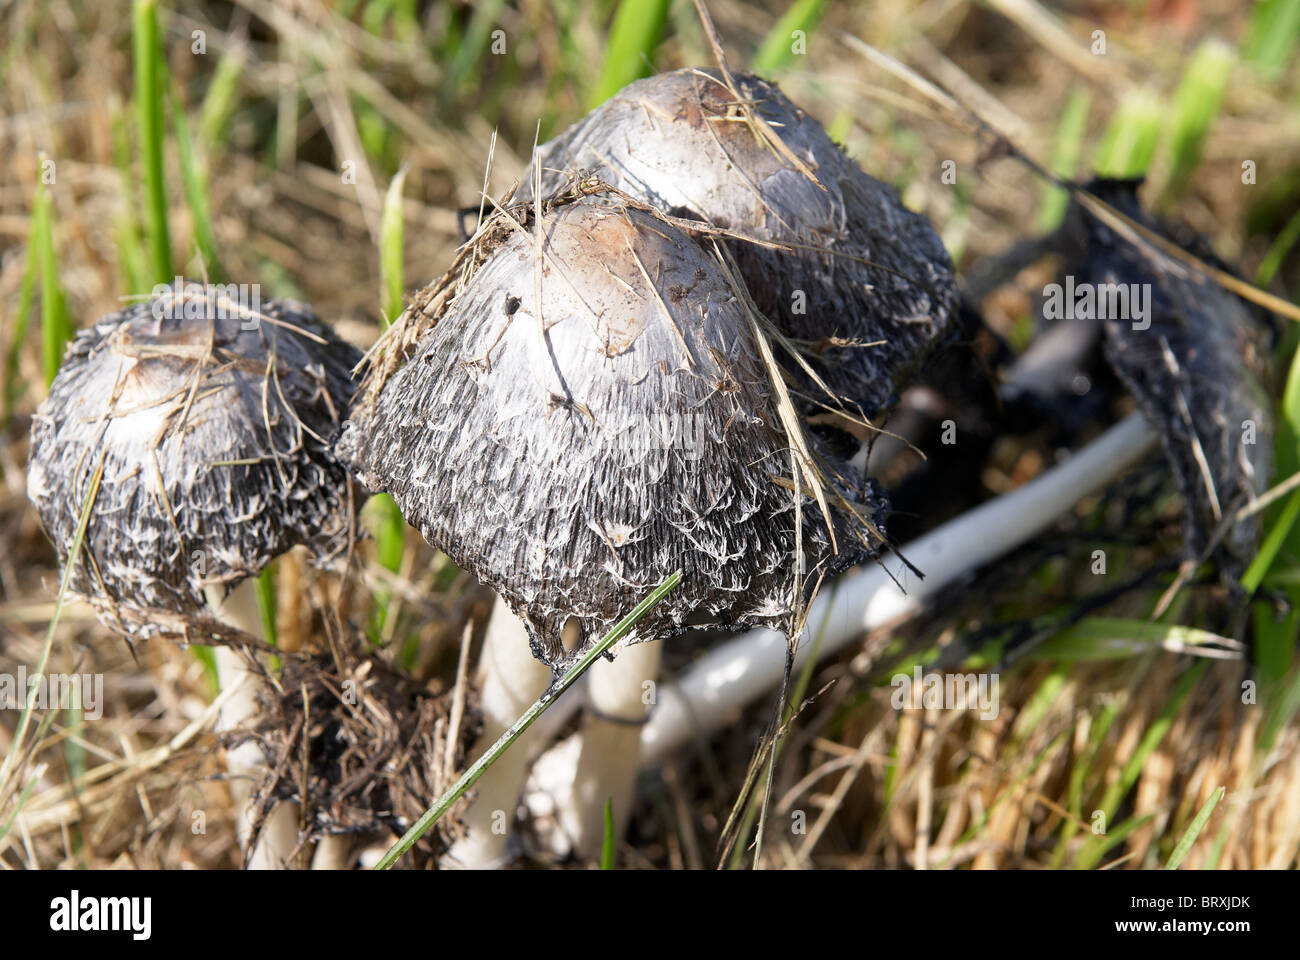 there are toadstools in-field Stock Photo